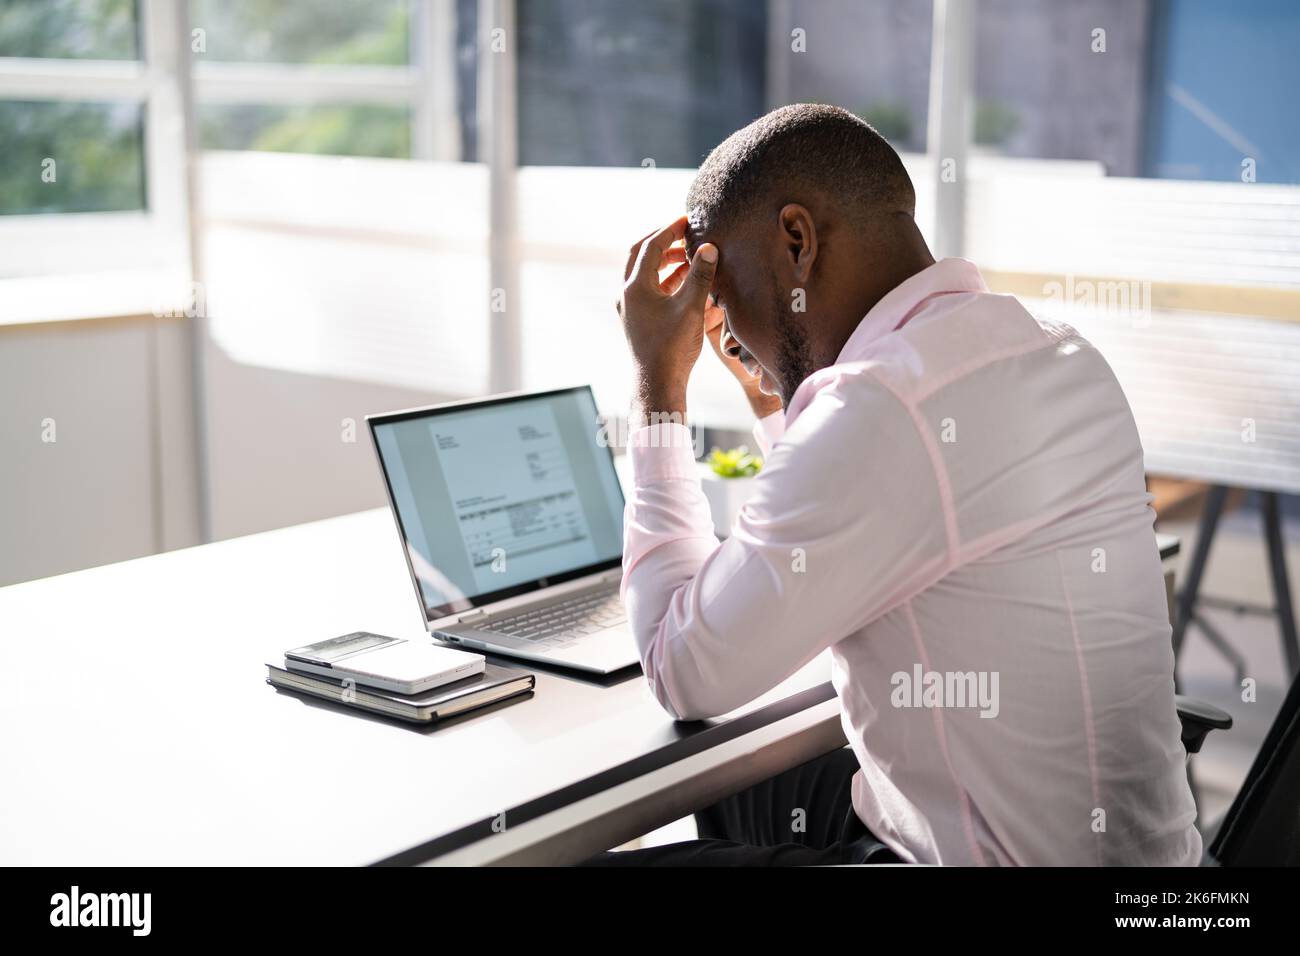 Stressed Sick African American Employee Man At Computer Stock Photo